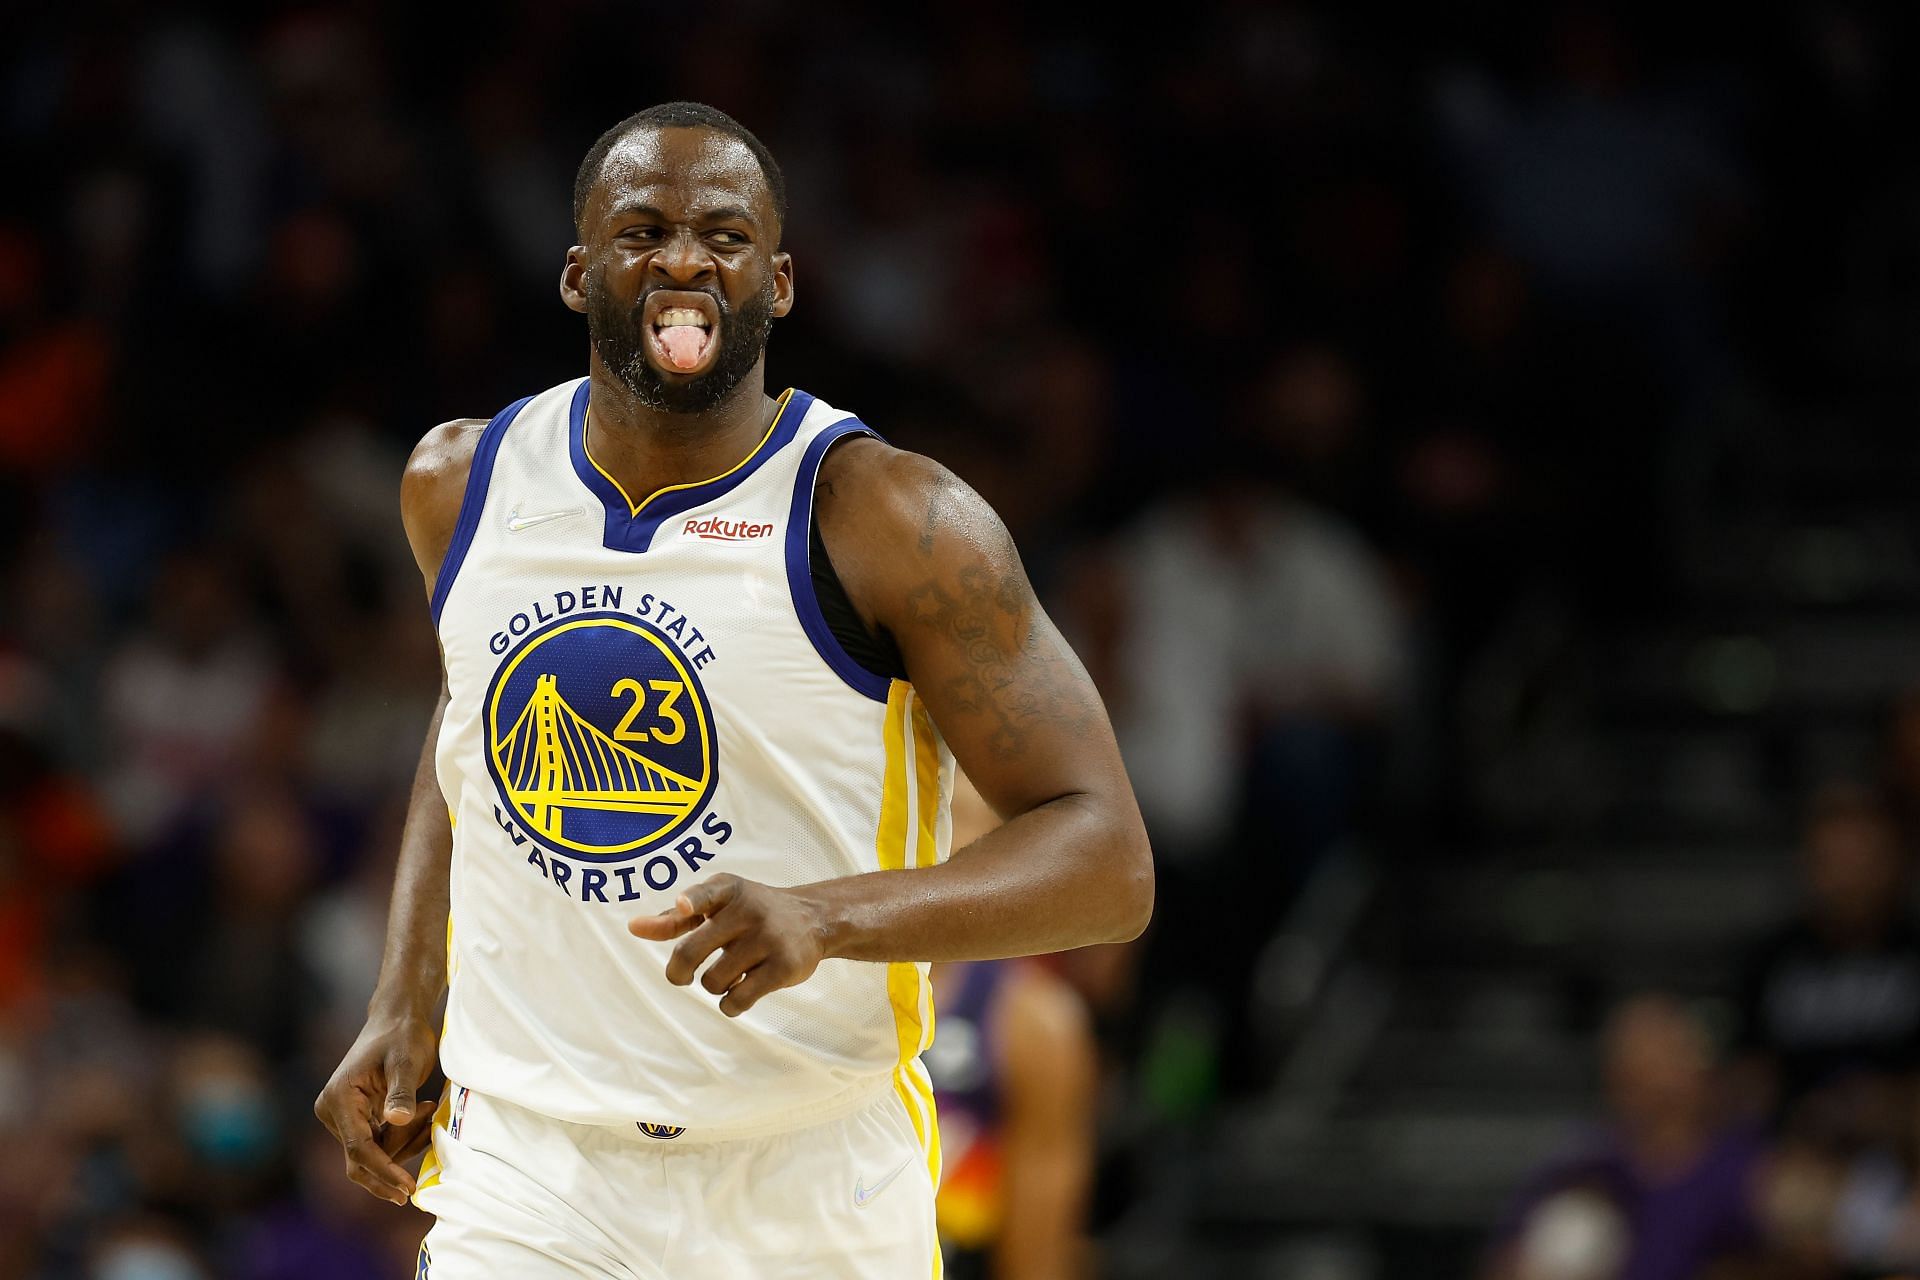 Draymond Green of the Golden State Warriors against the Phoenix Suns